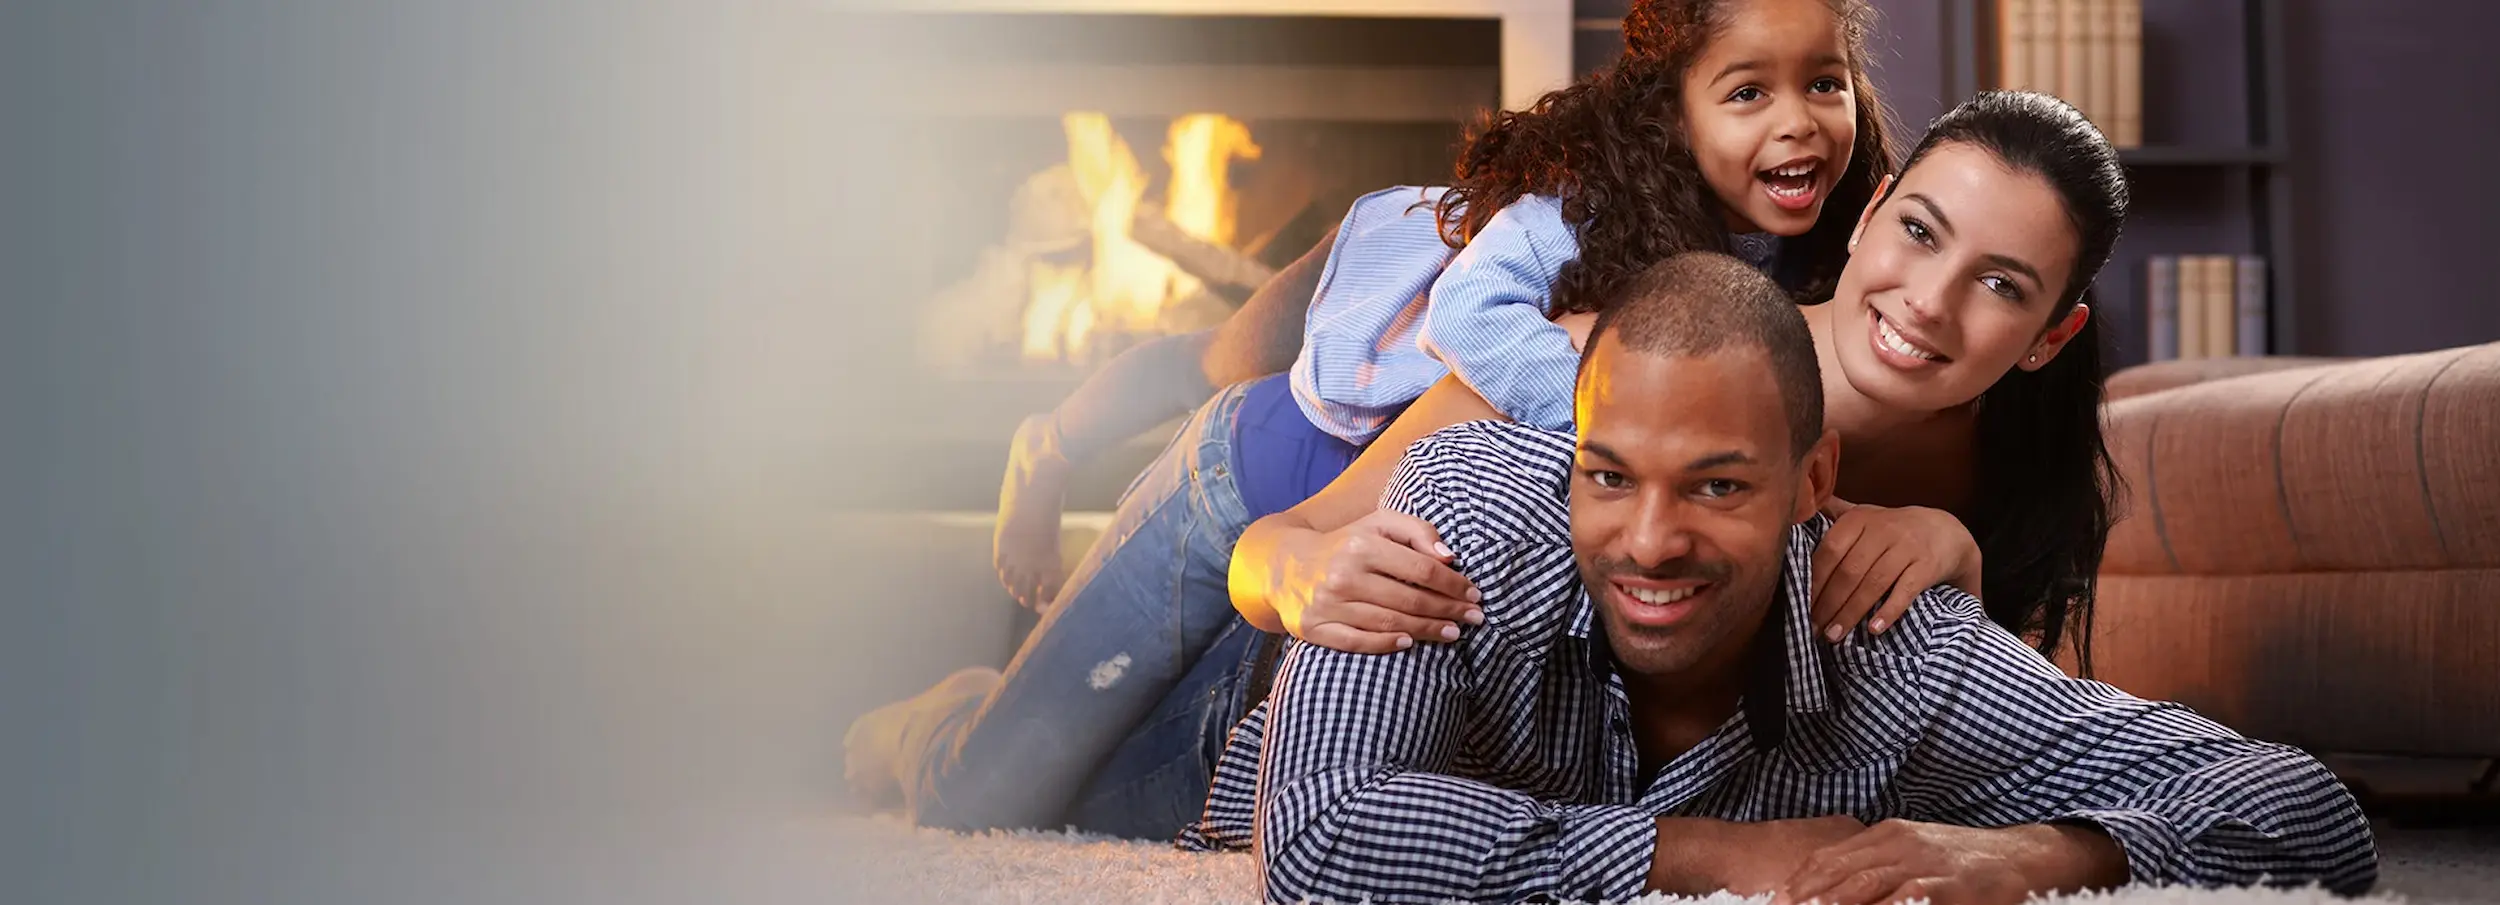 Smiling African American couple with child lying piled on a rug in a living room in front of a fireplace.